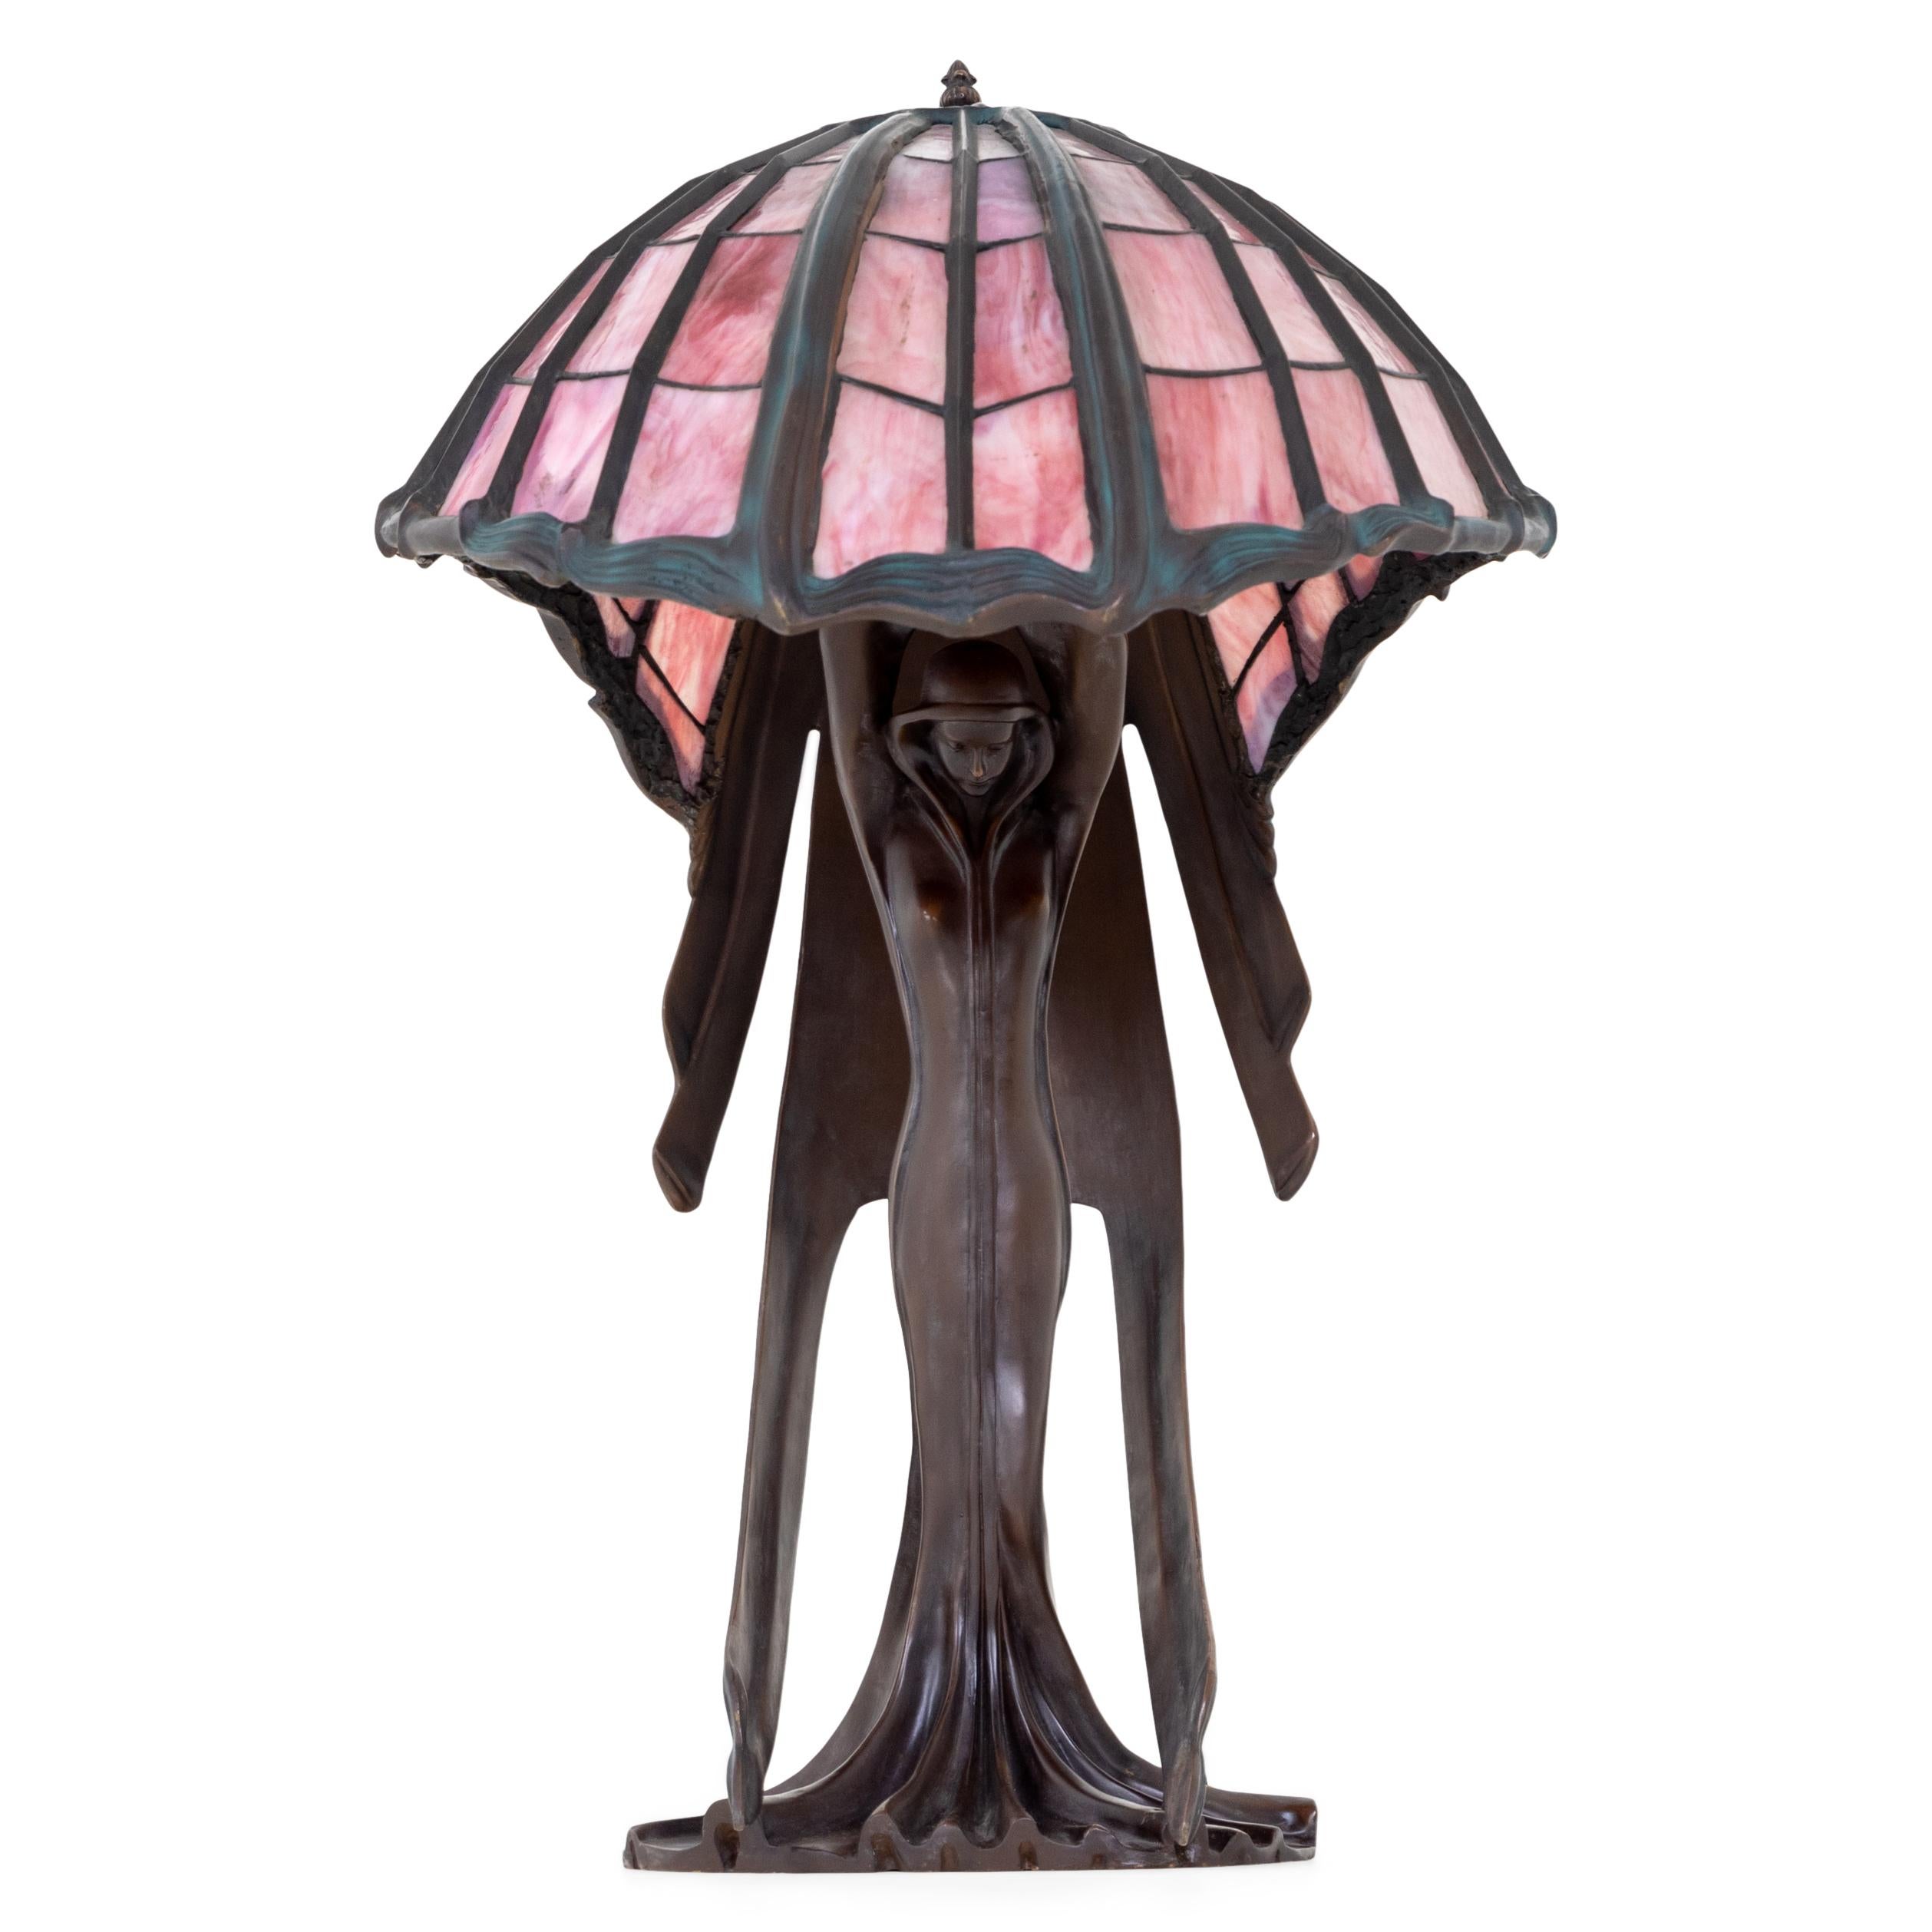 Peter Behrens' Flying Lady Table Lamp, Tiffany-Style, 2nd Half 20th Century